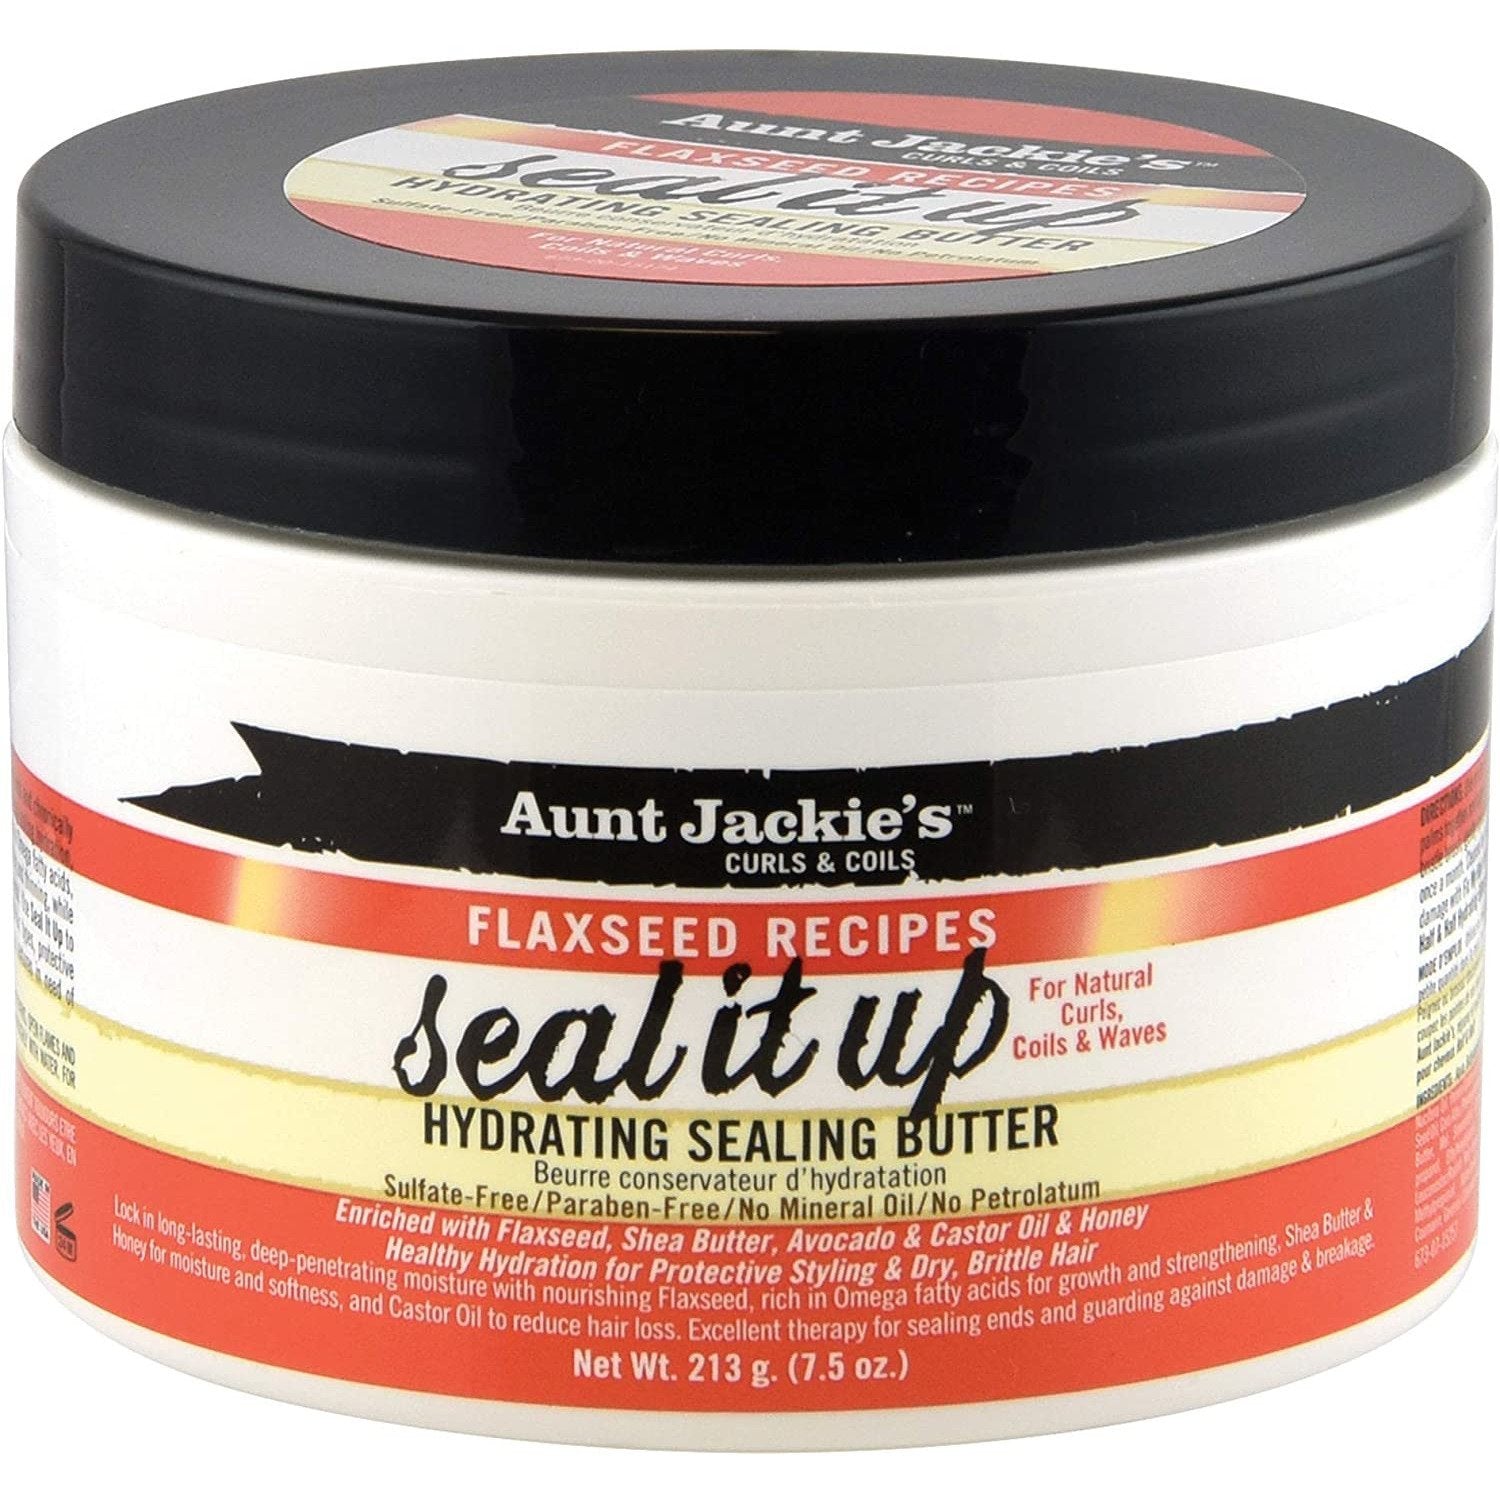 AUNT JACKIE'S "SEAL IT UP!" SEALING BUTTER (7.5oz) Flaxseed Recipes-Aunt Jackie's- Hive Beauty Supply